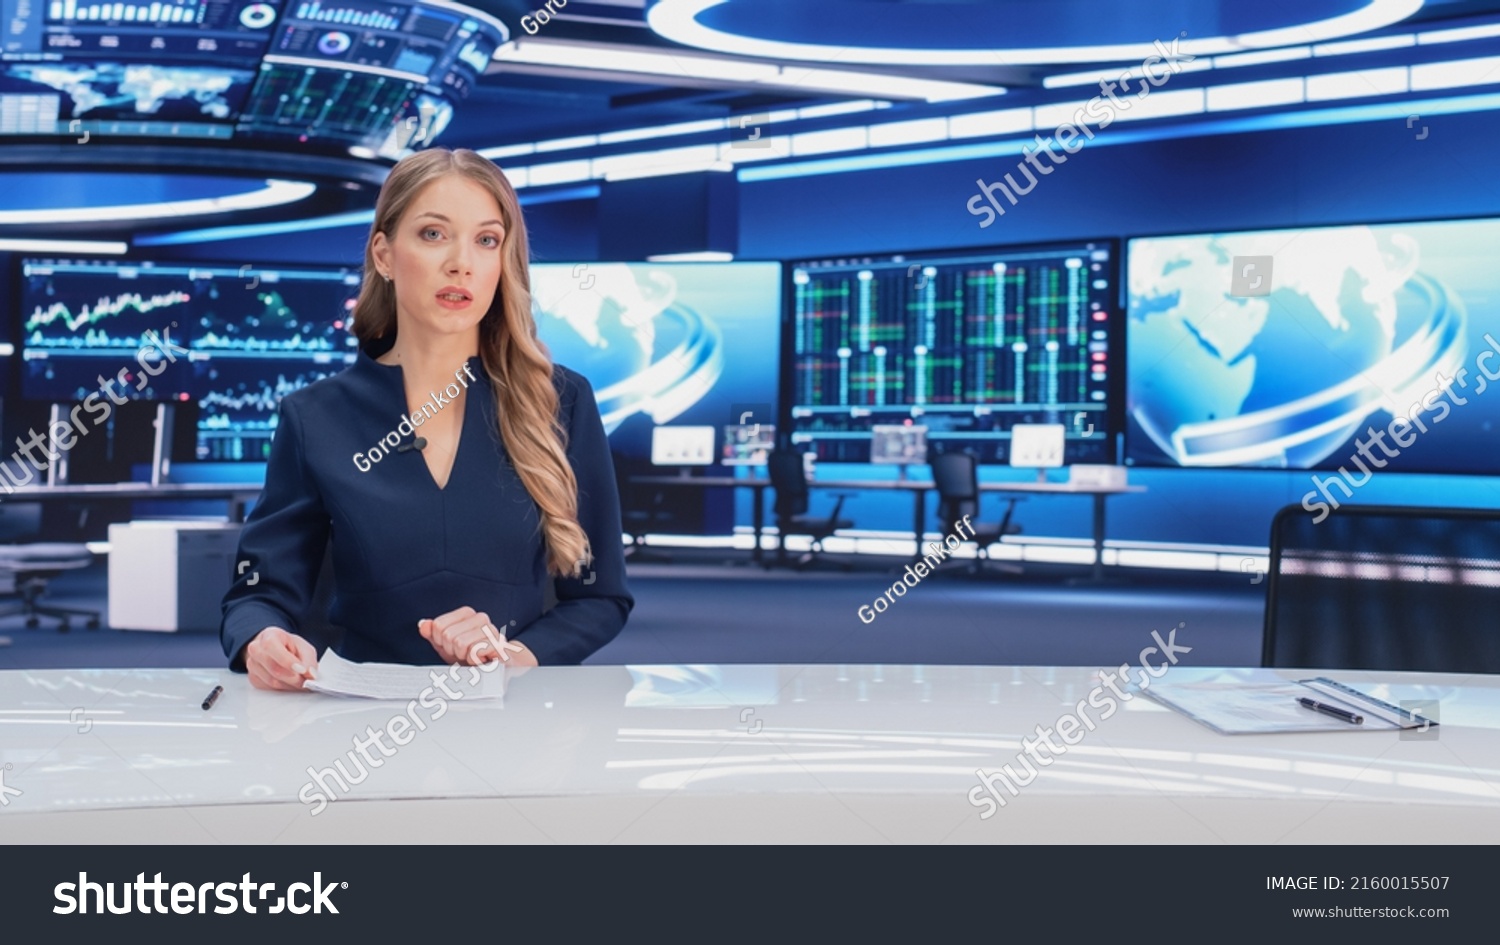 TV Live News Program with Professional Female Presenter Reporting. Television Cable Channel Anchorwoman Talks, Business, Economy, Entertainment. Mockup Network Broadcasting in Newsroom Studio Concept #2160015507